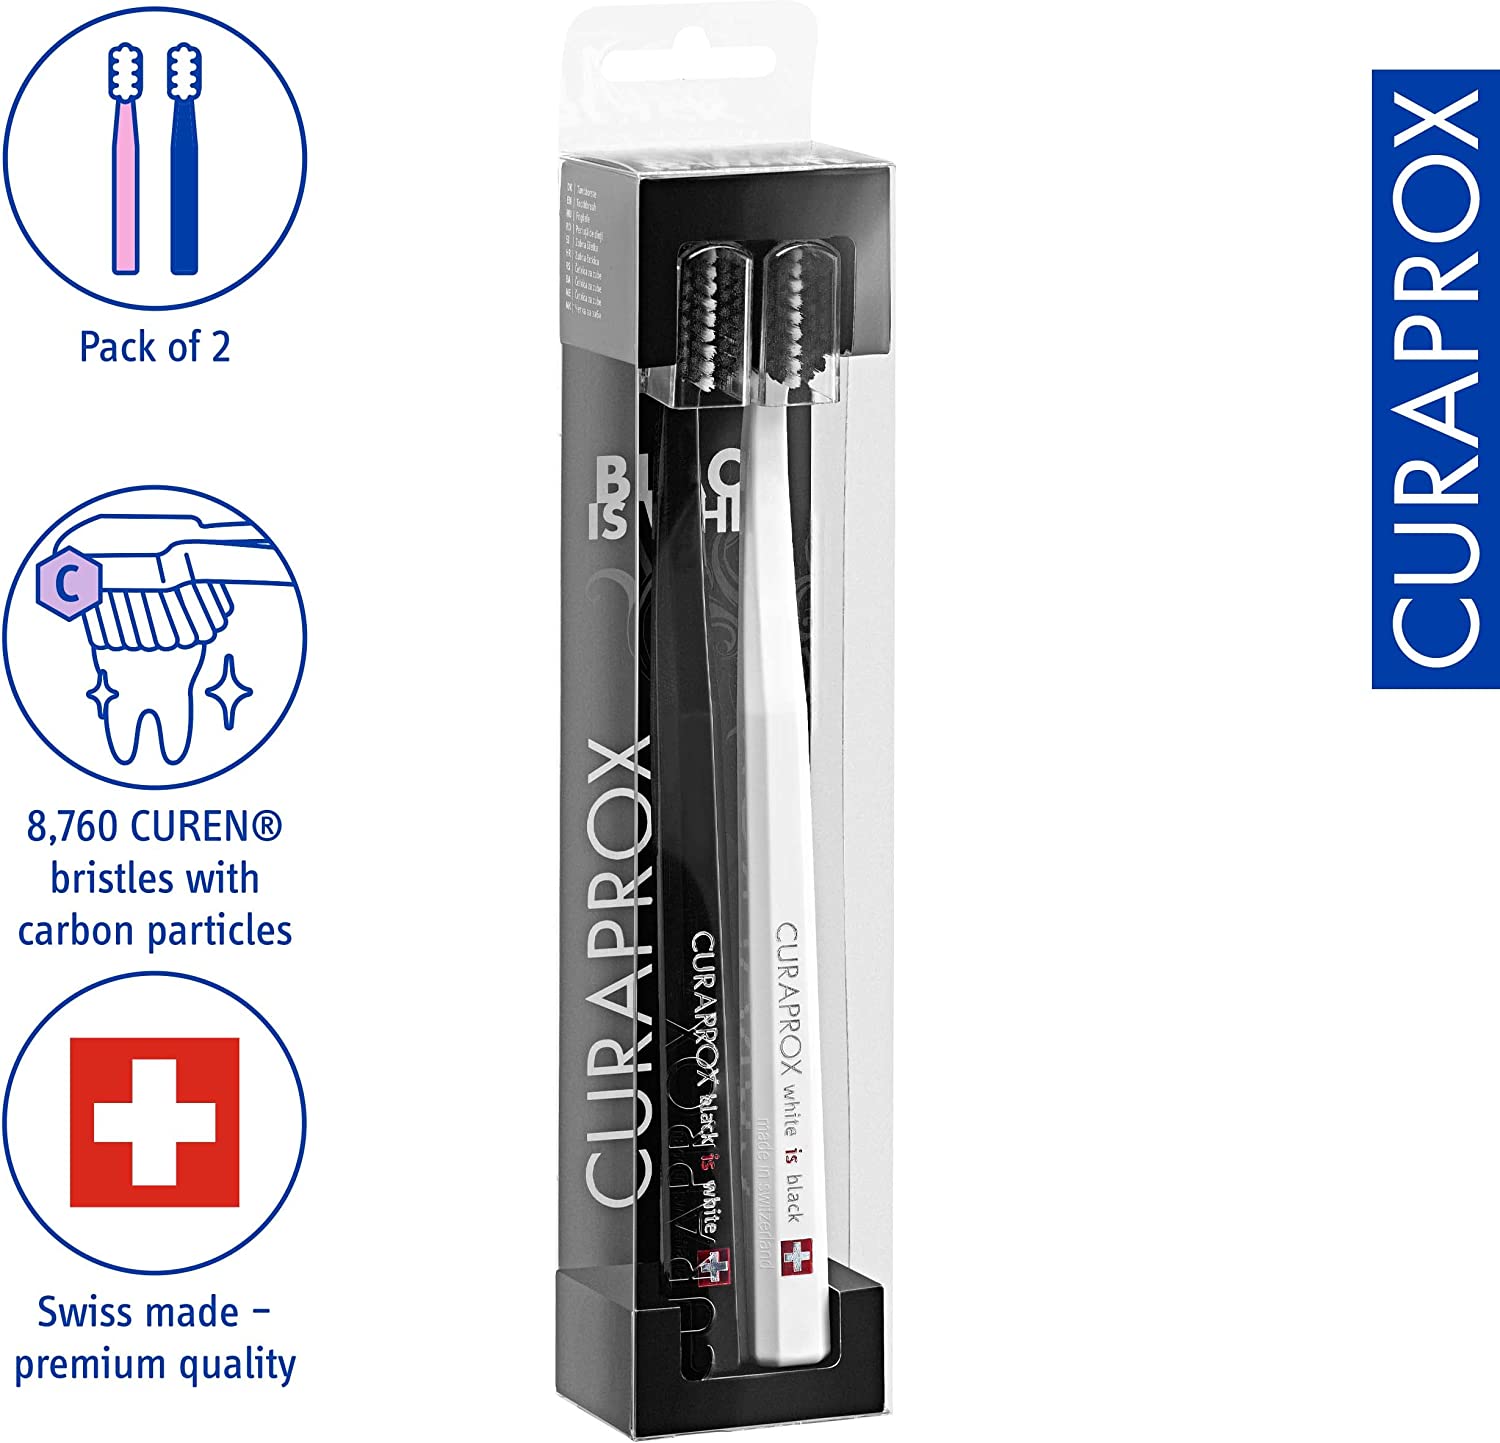 Curaprox Black Is White Toothbrush Duo Pack